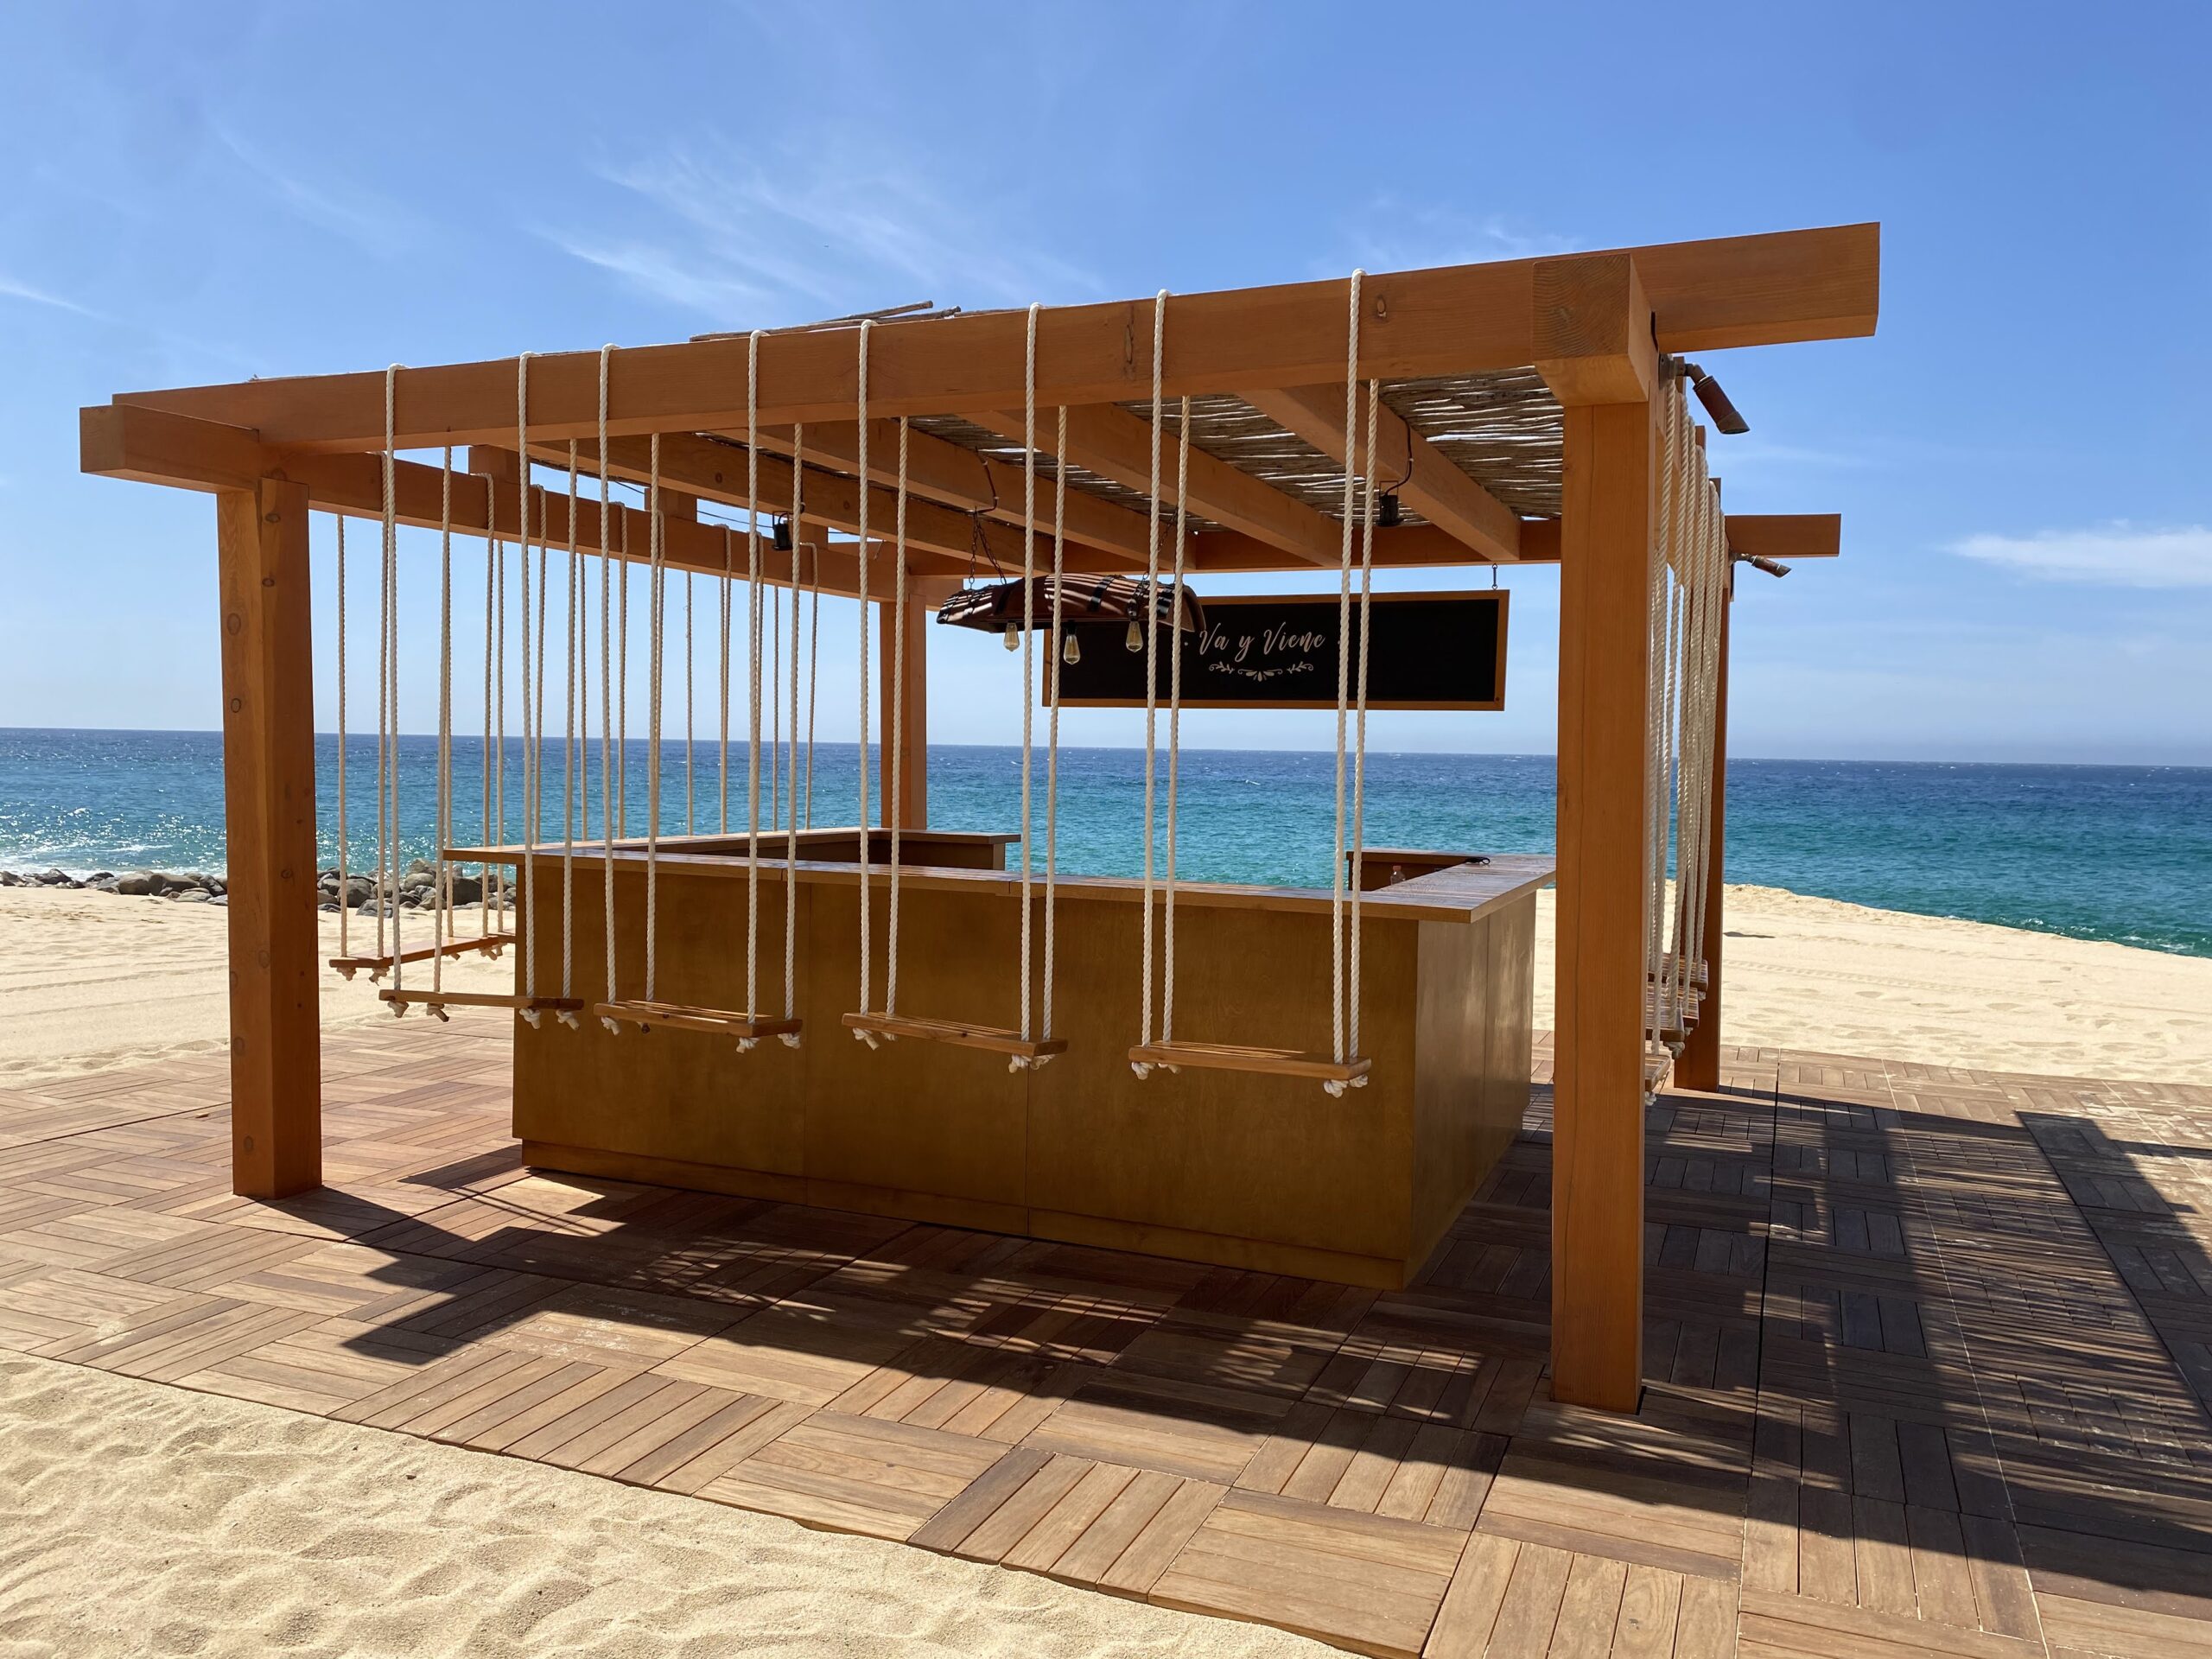 a wooden structure on a beach